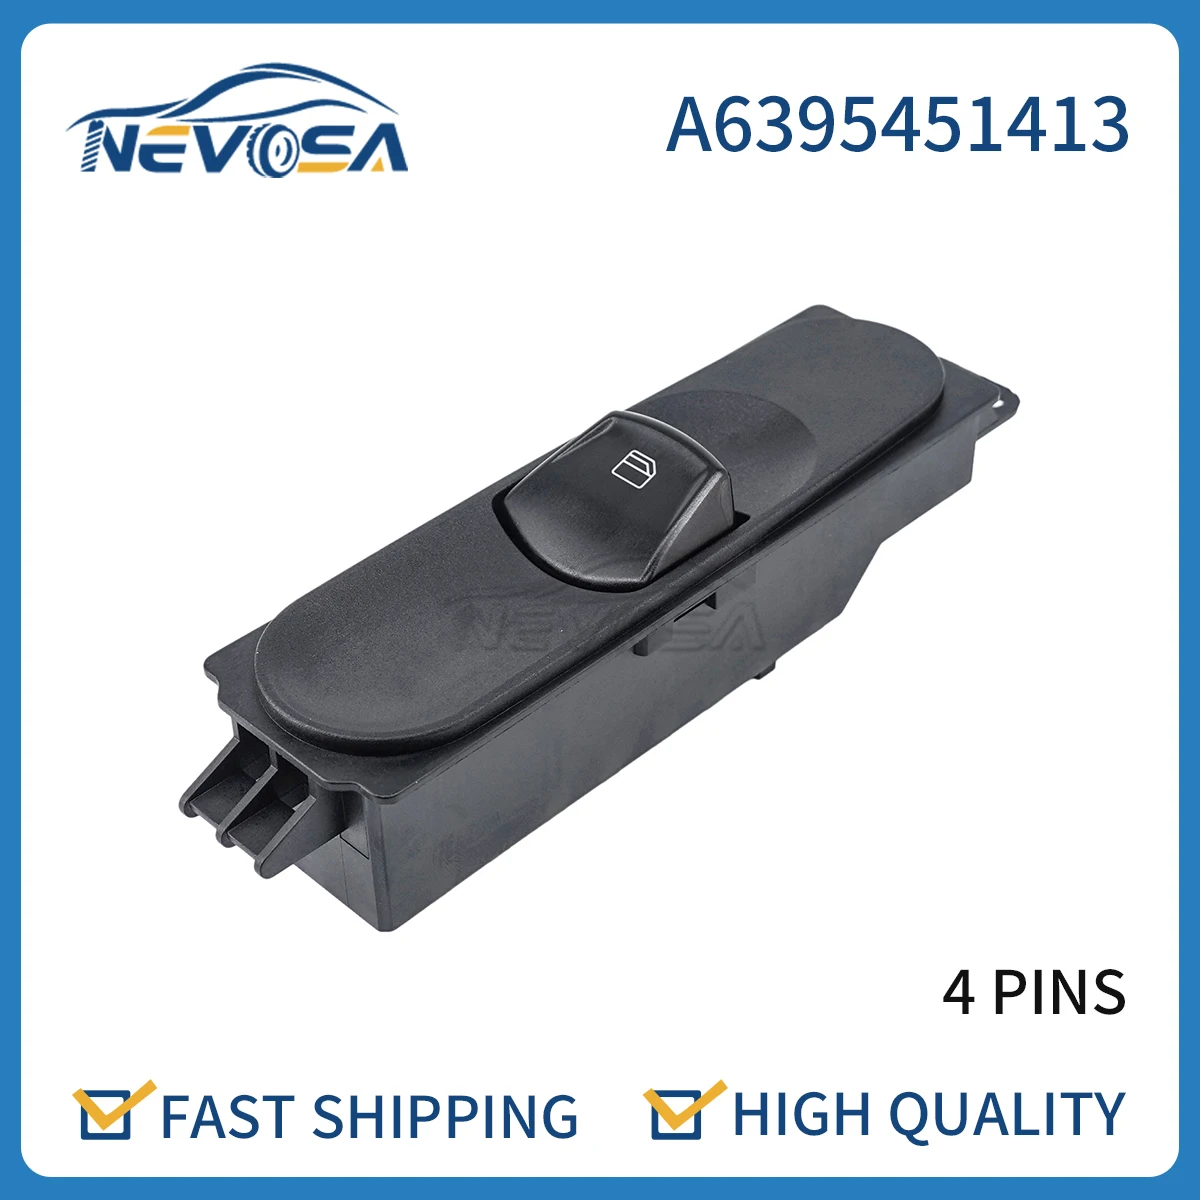 

Nevosa A6395451413 Front Right Car Power Window Switch Master Panel For Mercedes Benz Vito W639 2003-2012 A6395450613 6395451413